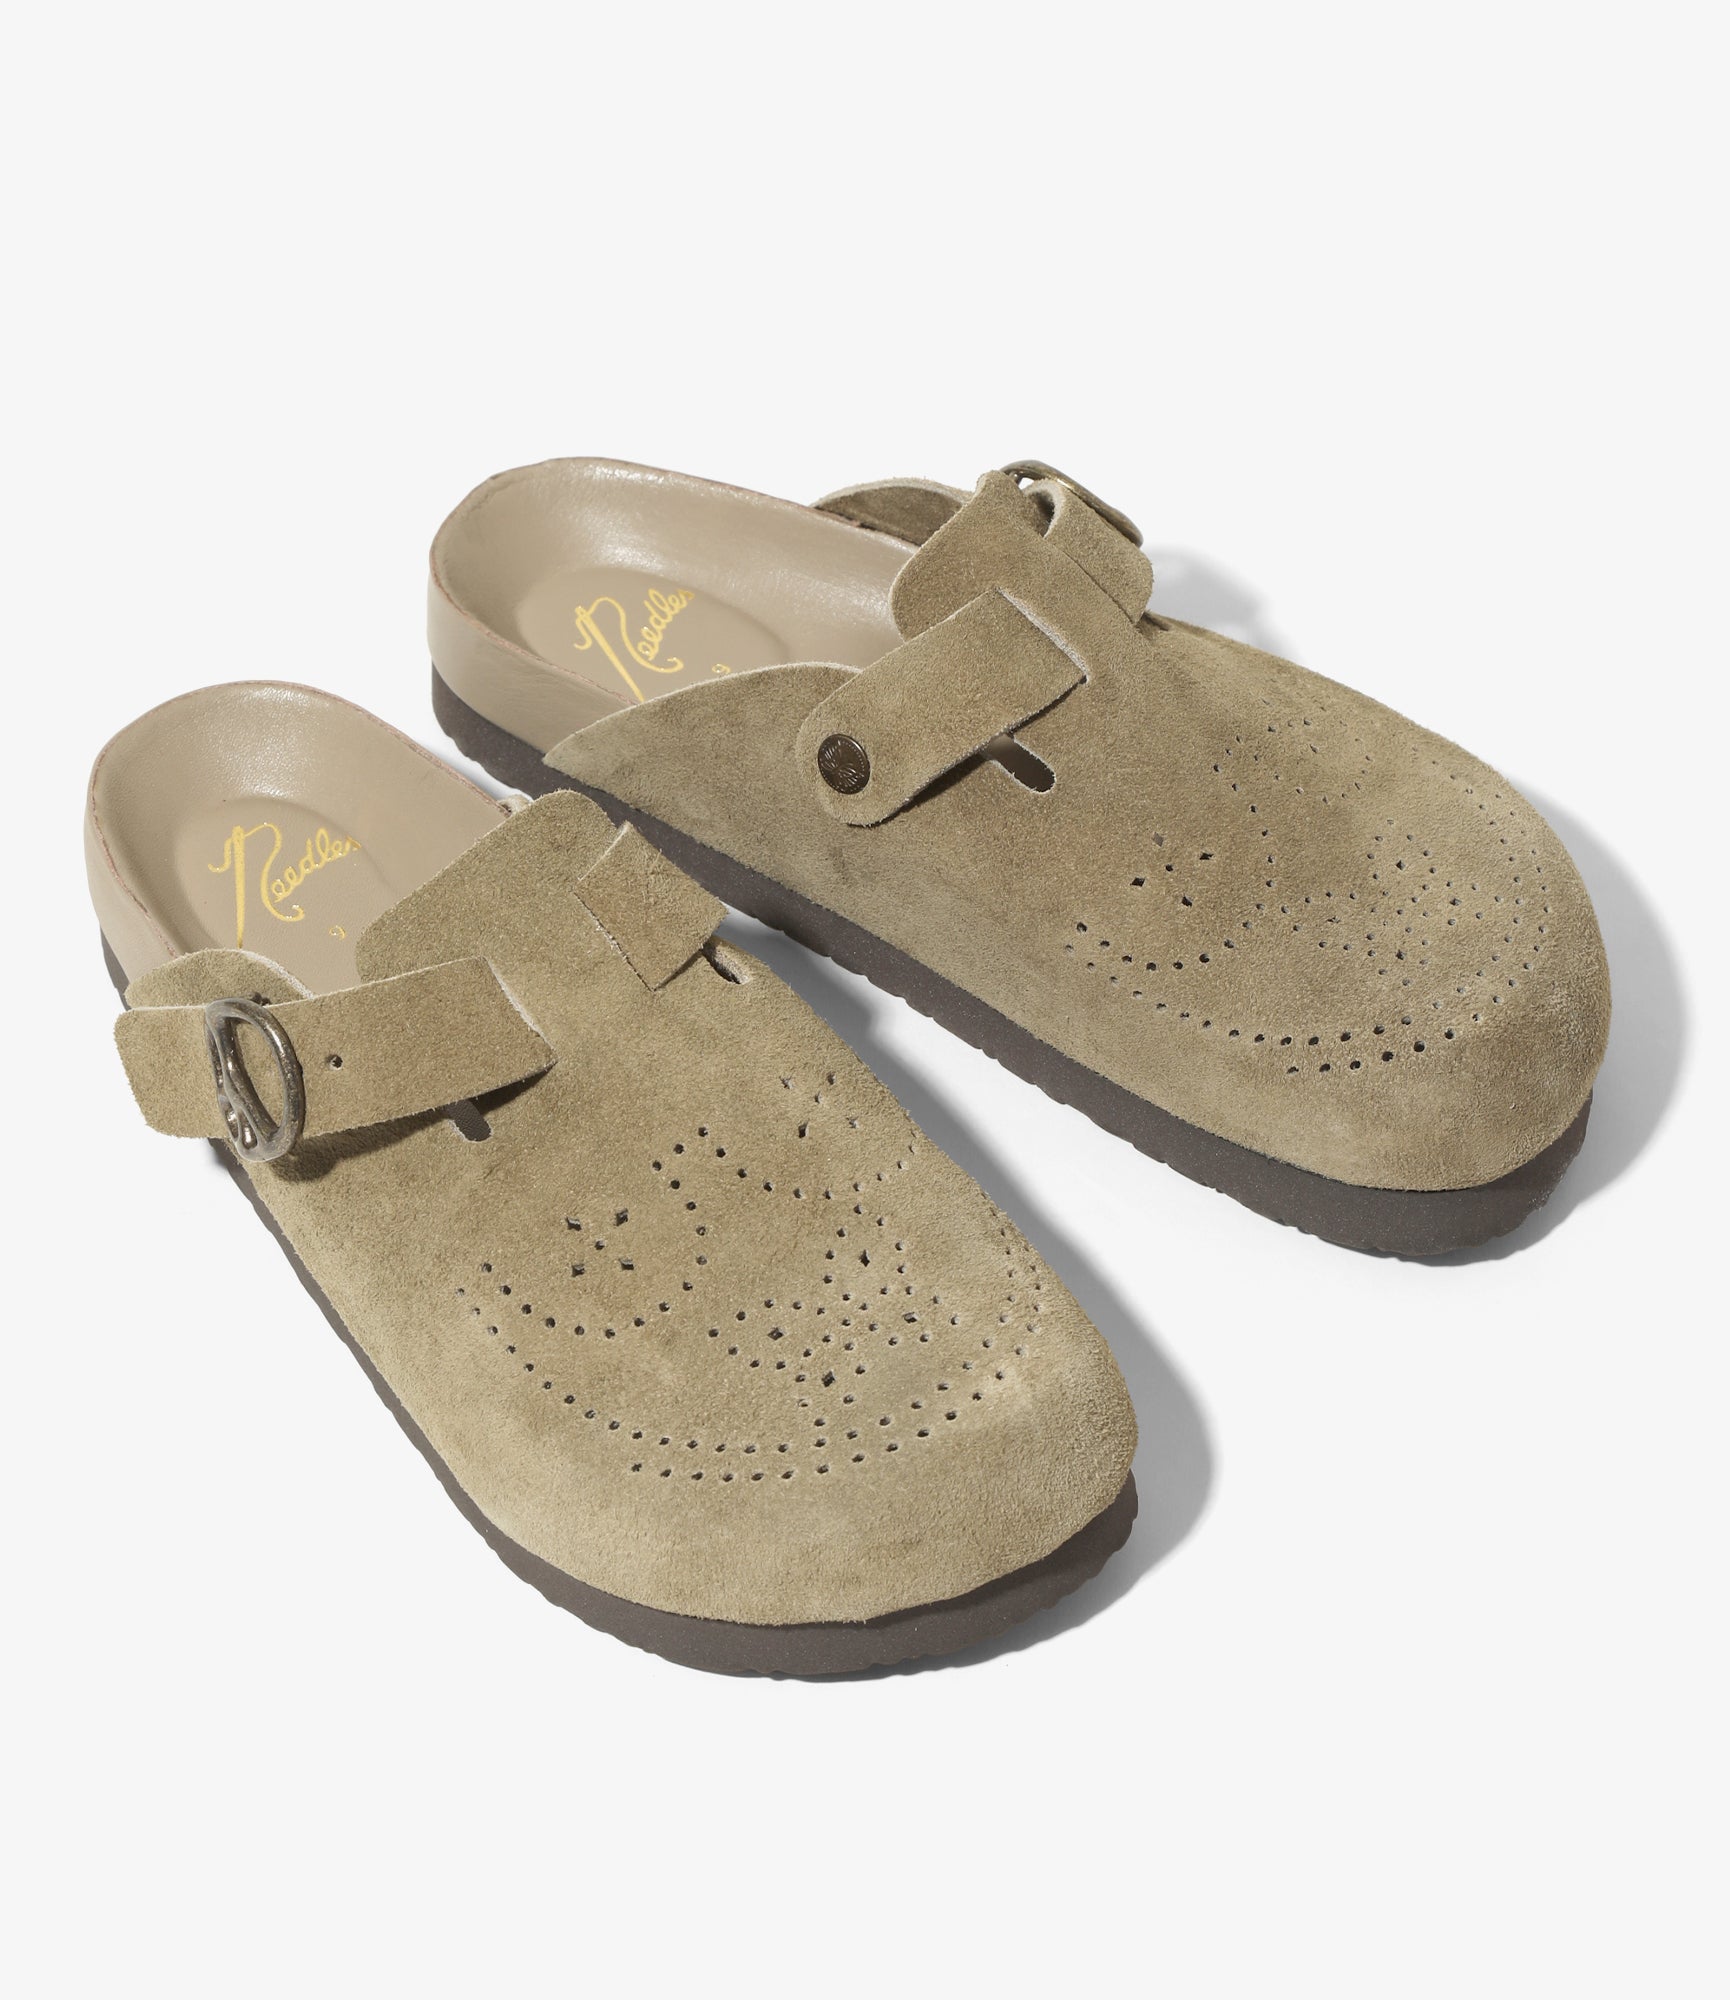 Needles Clog Sandal - Suede Leather - Taupe